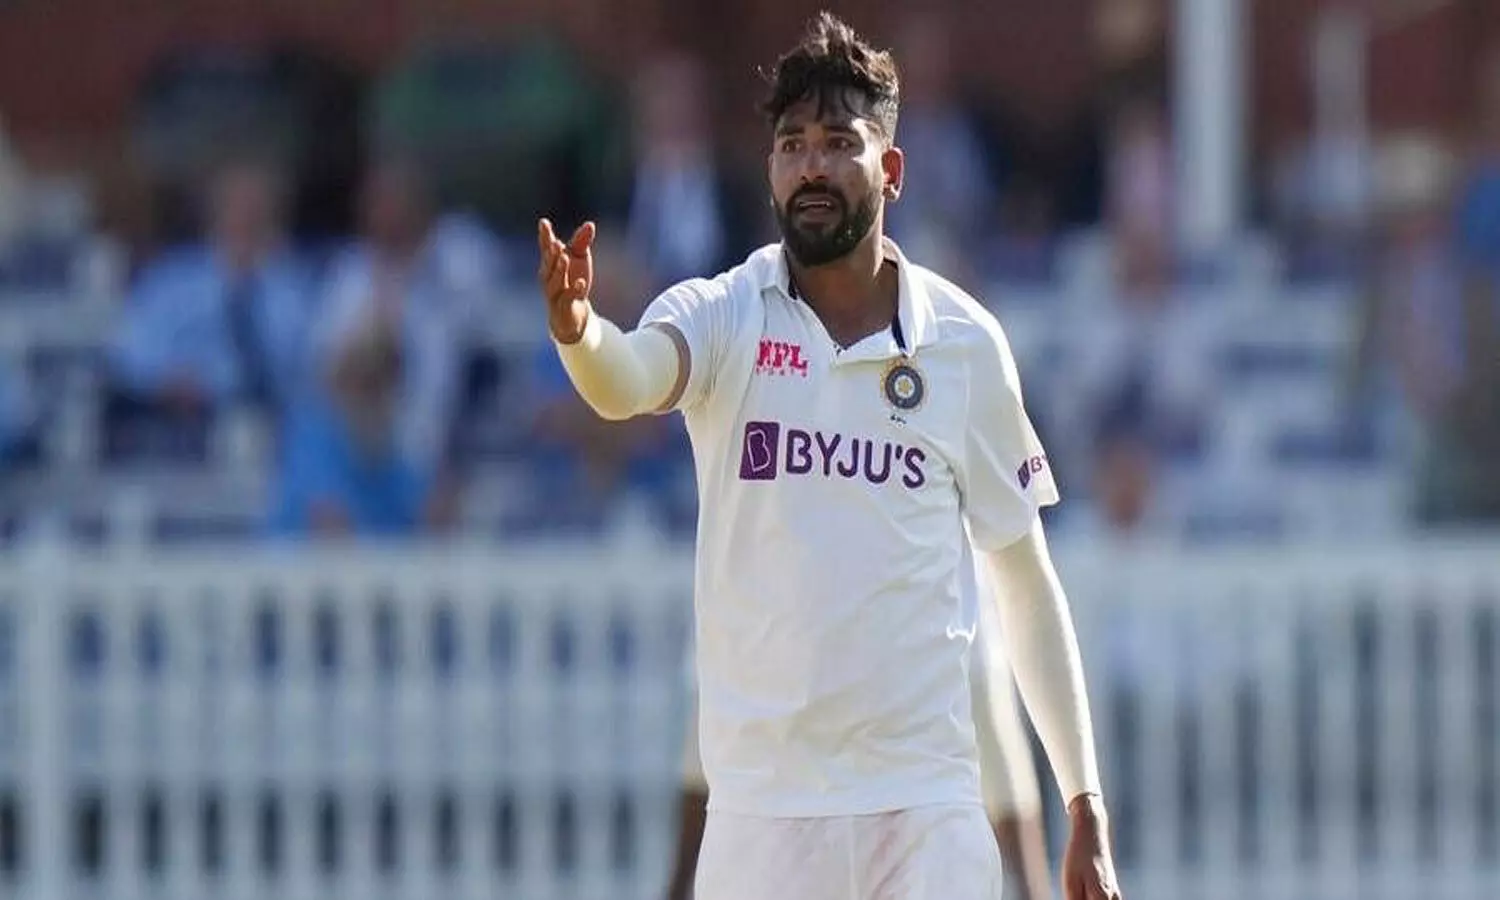 Virat Kohli was upset: Rishabh Pant reveals ball was thrown at Mohammed Siraj on Day 1 of 3rd Test against England